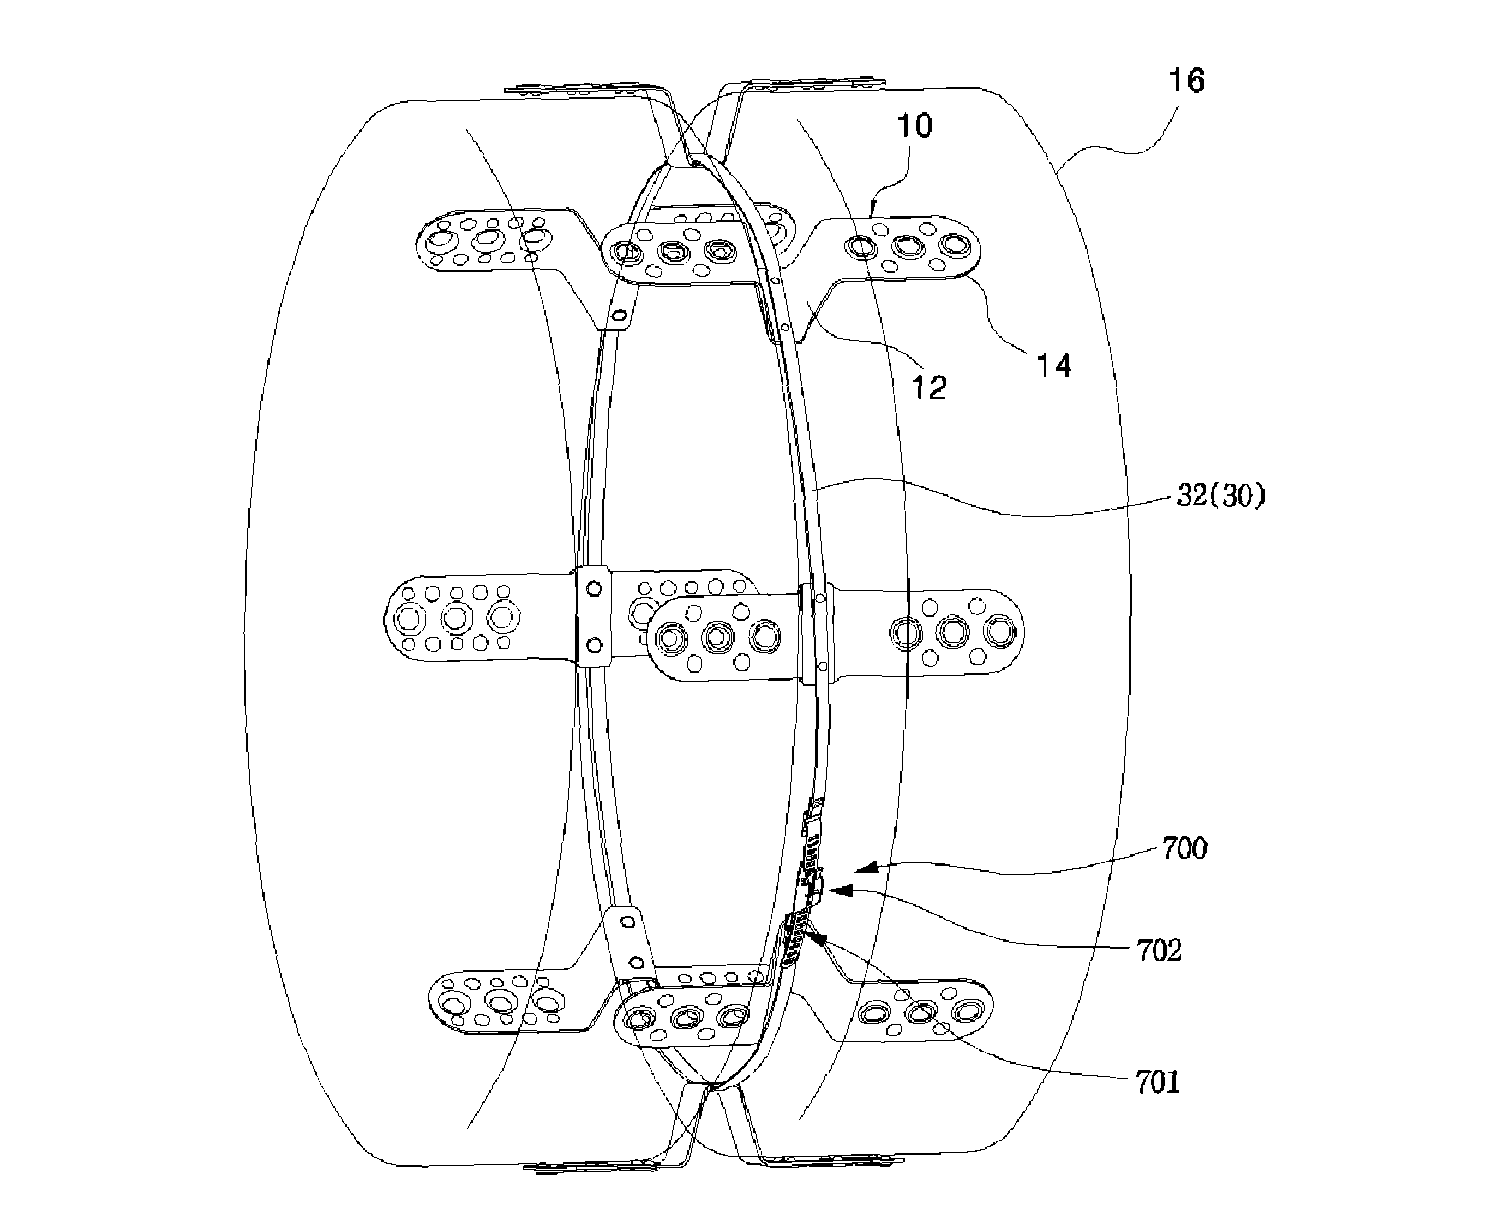 Device for preventing slipping of vehicle